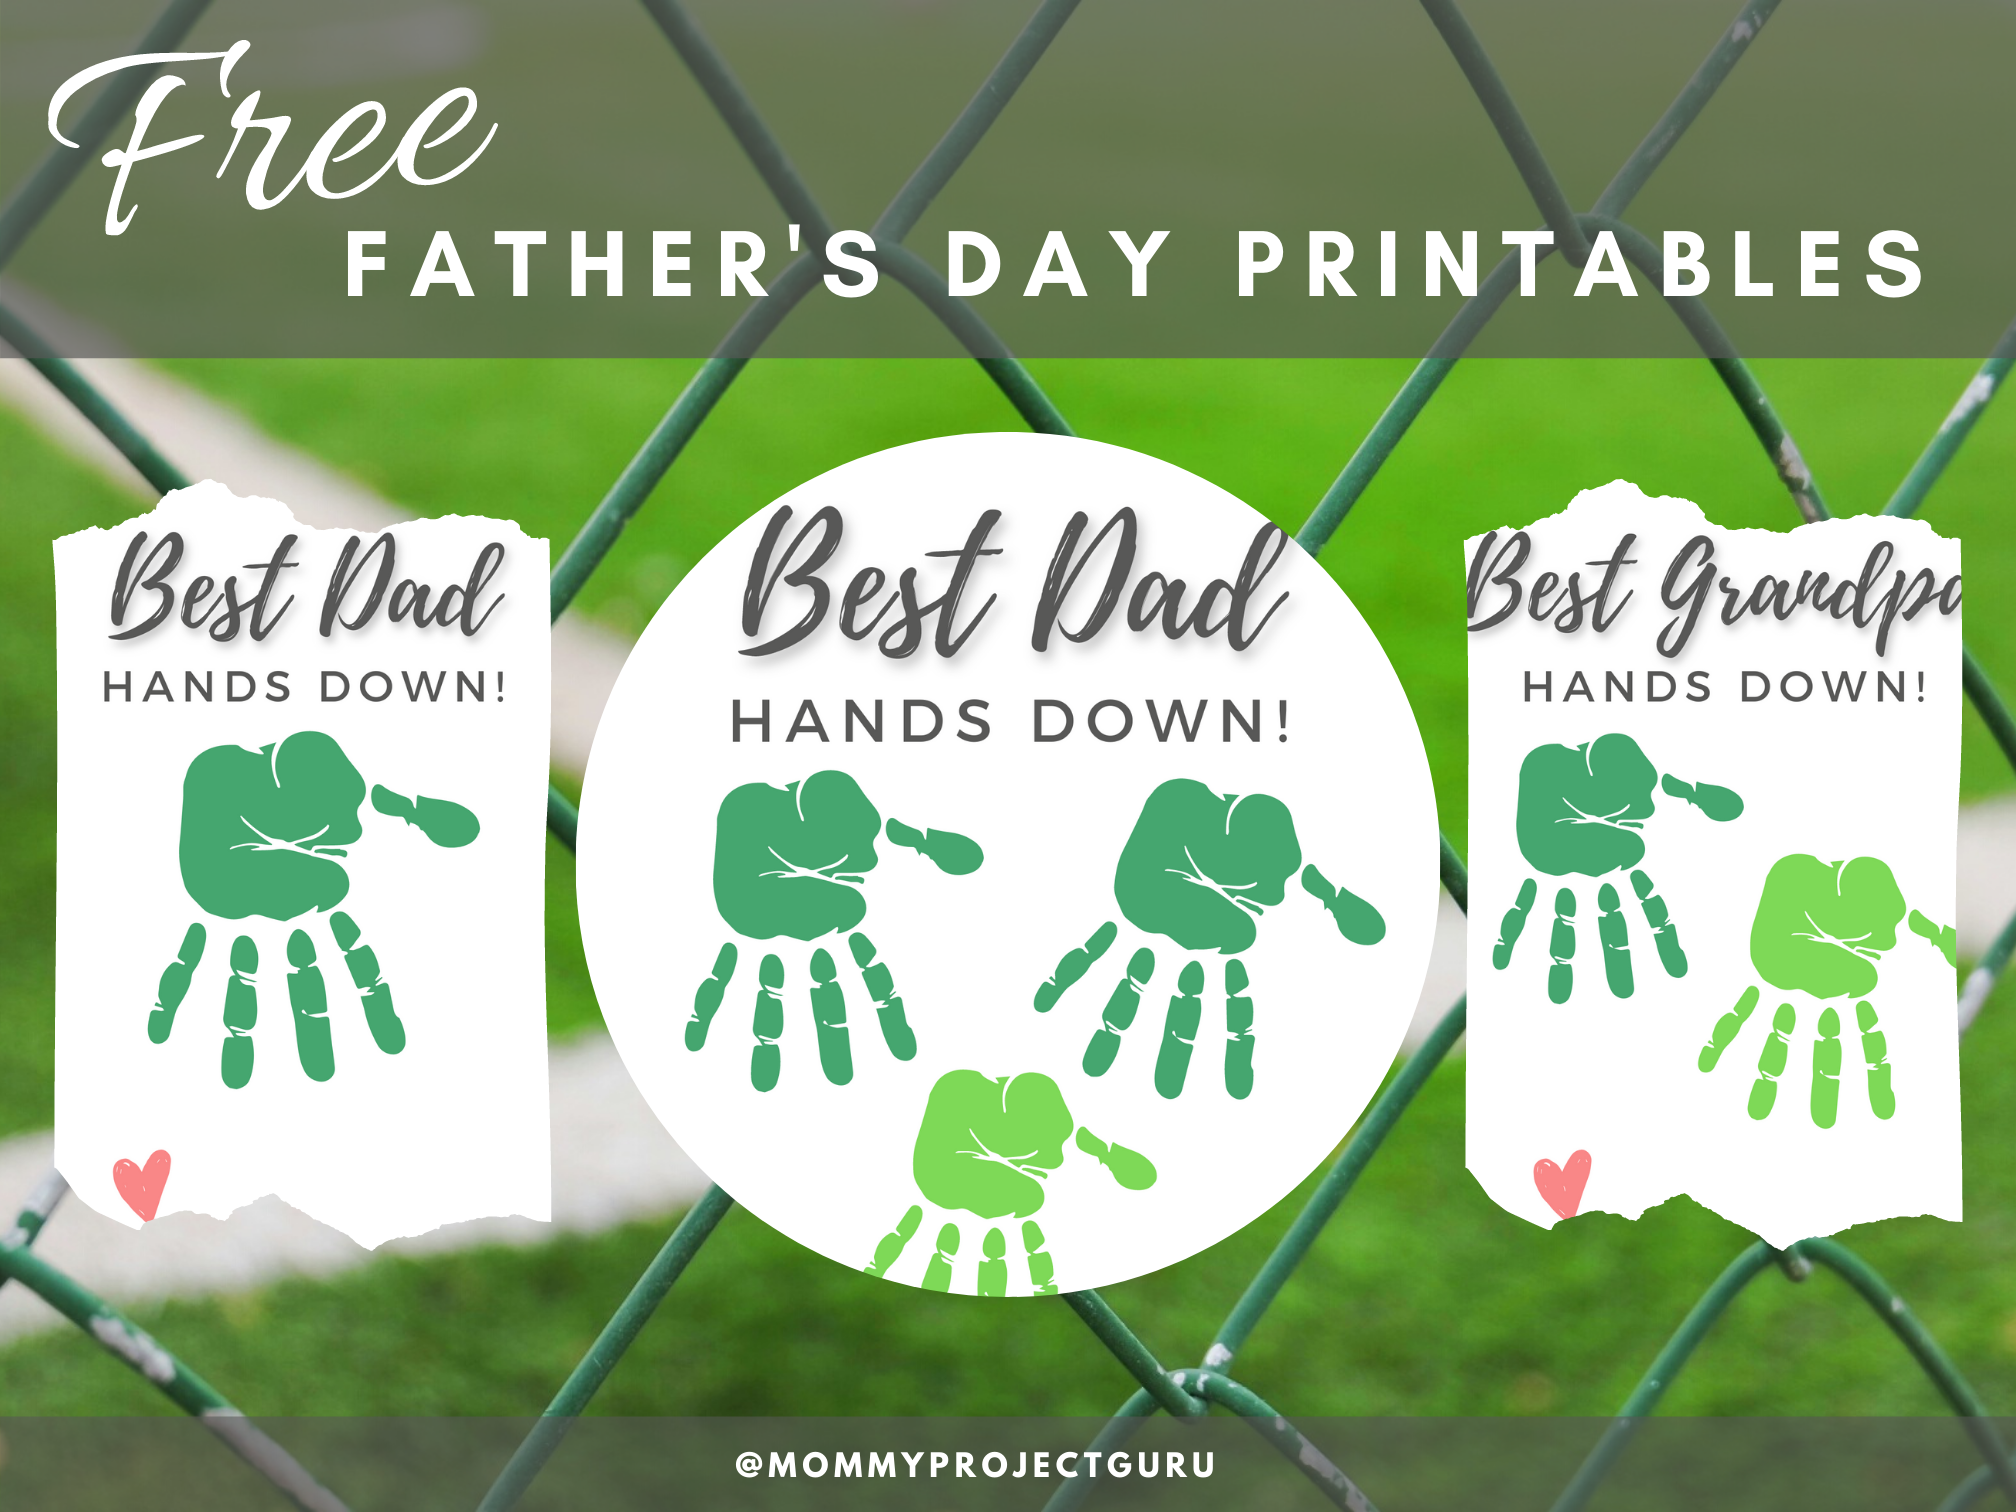 easy-free-father-s-day-handprint-printable-the-mommy-project-guru